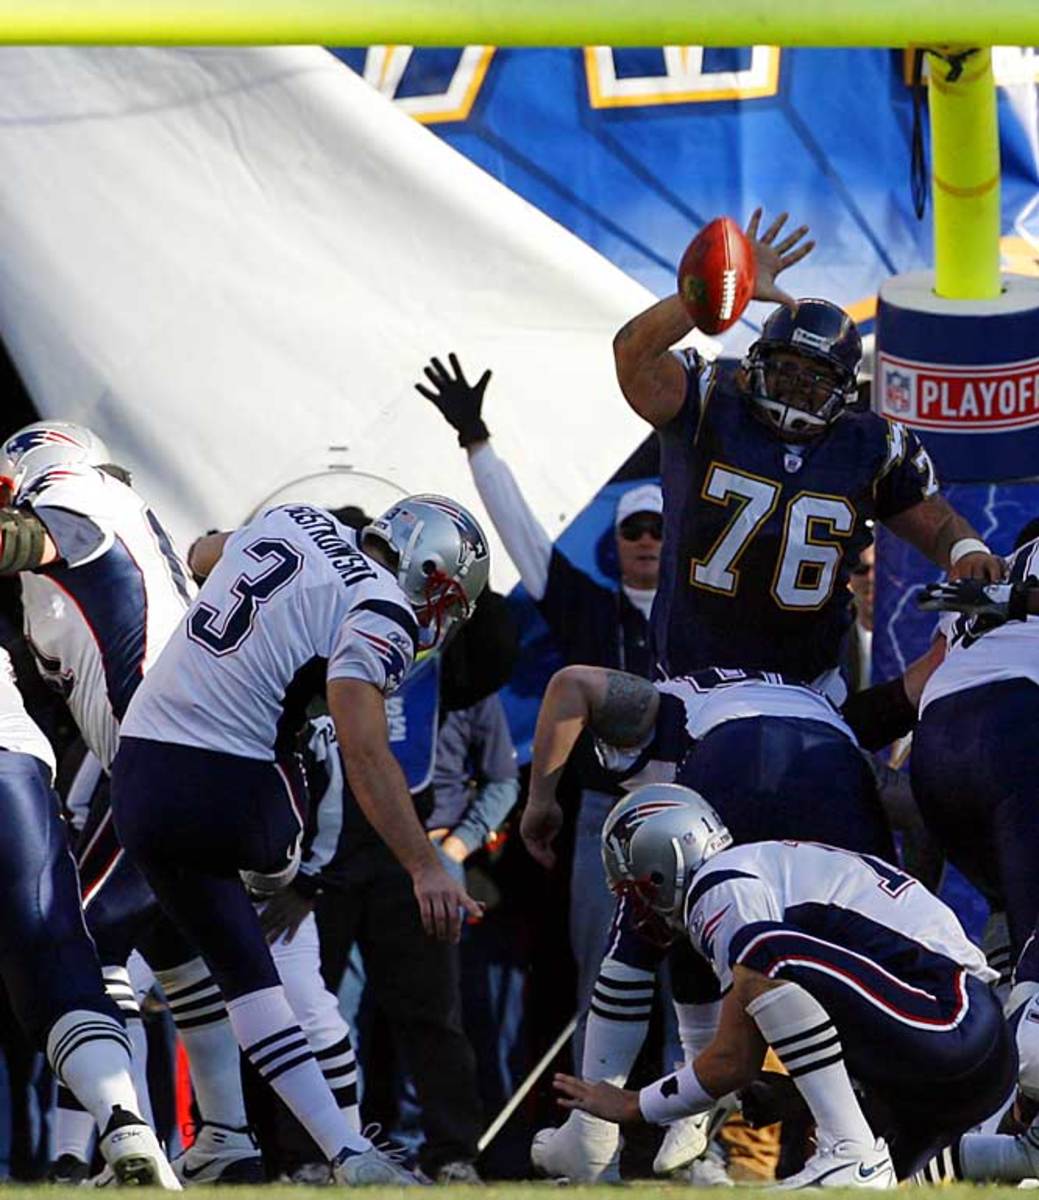 Patriots 24, Chargers 21